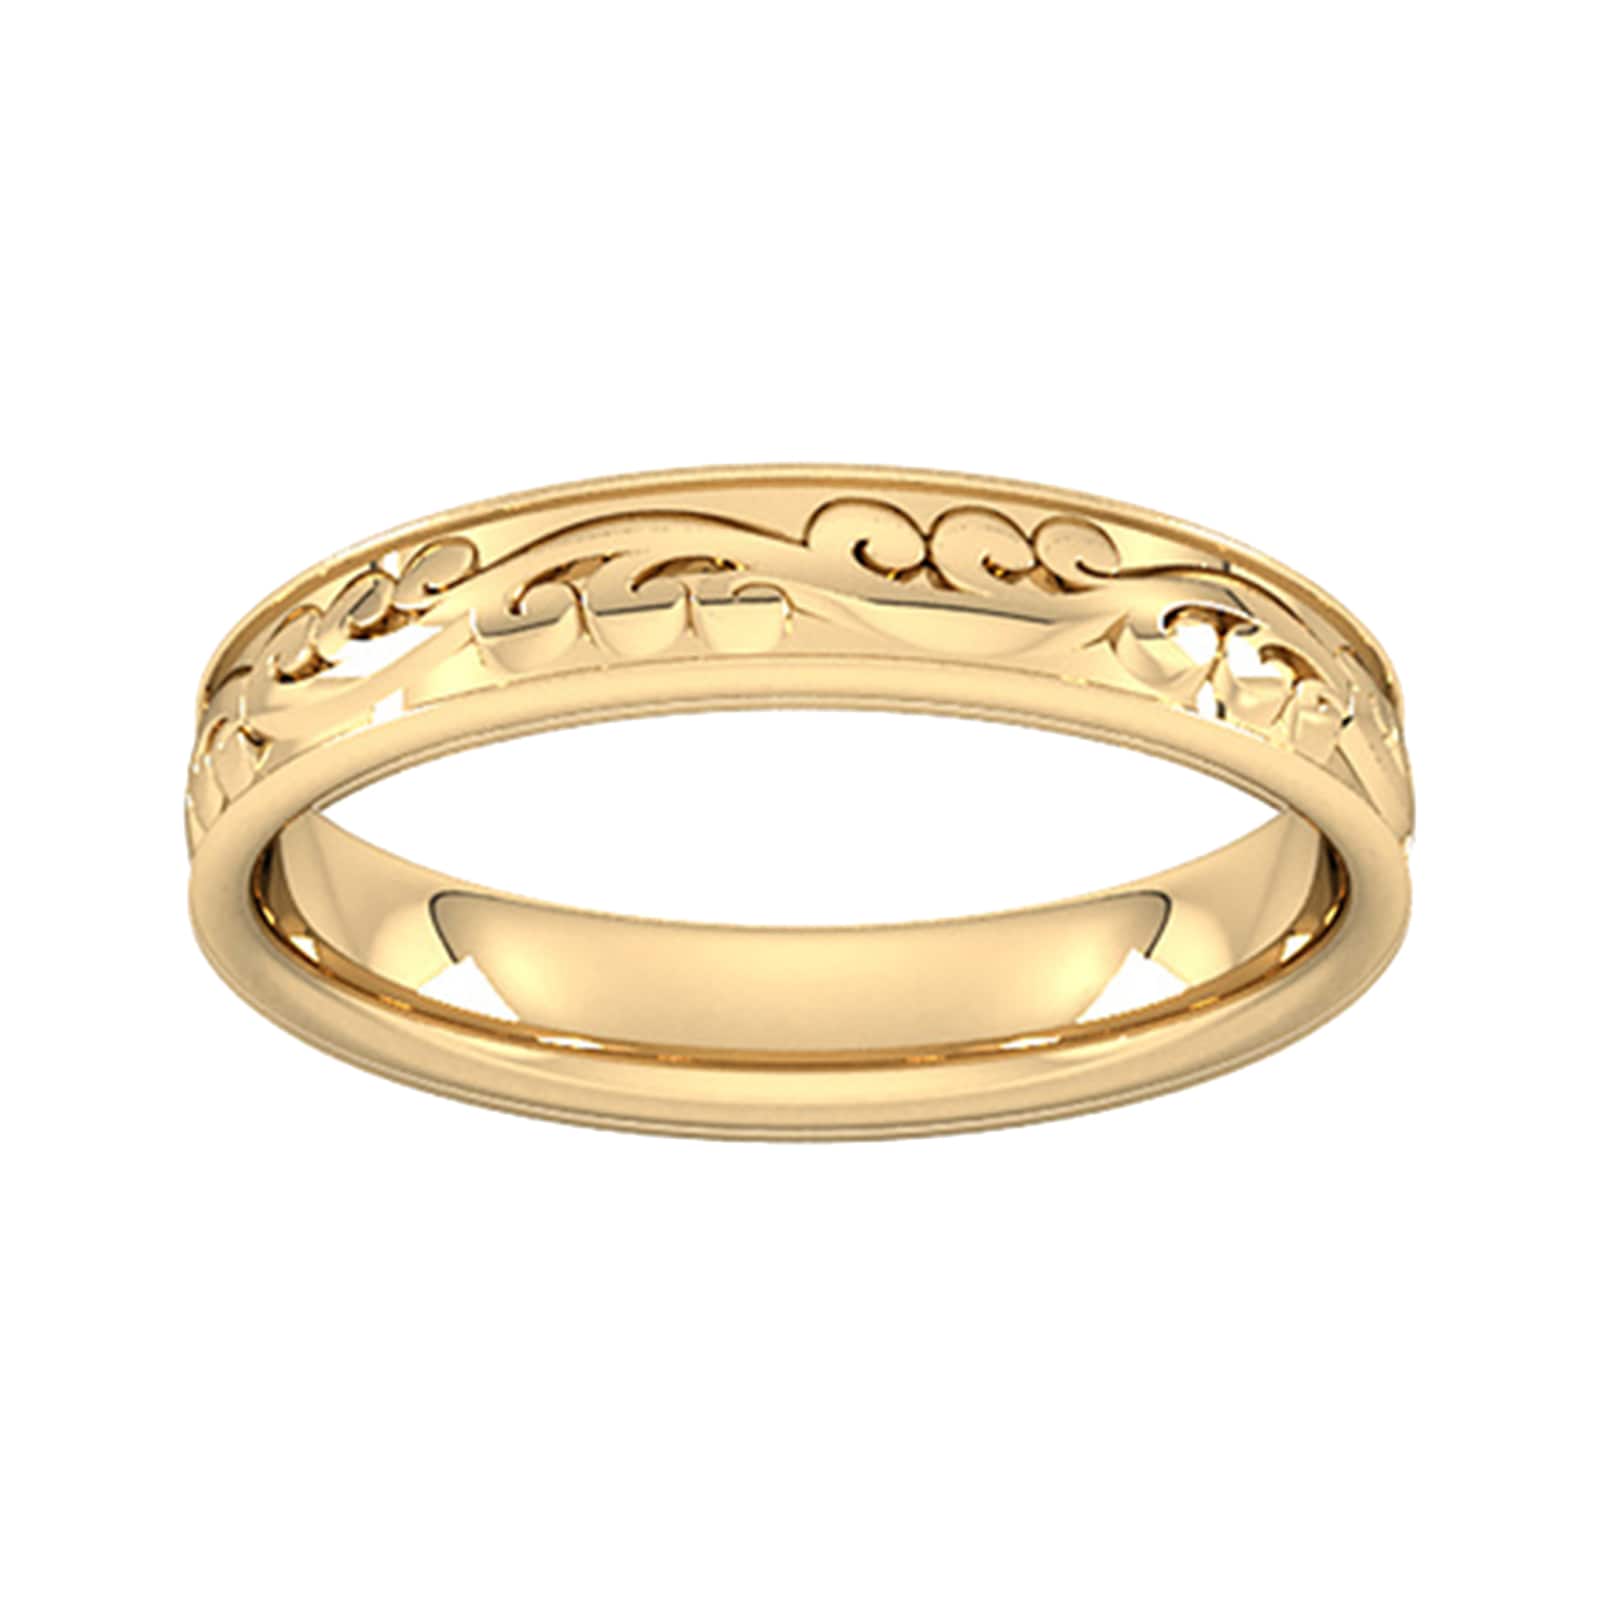 4mm Hand Engraved Wedding Ring In 18 Carat Yellow Gold - Ring Size U